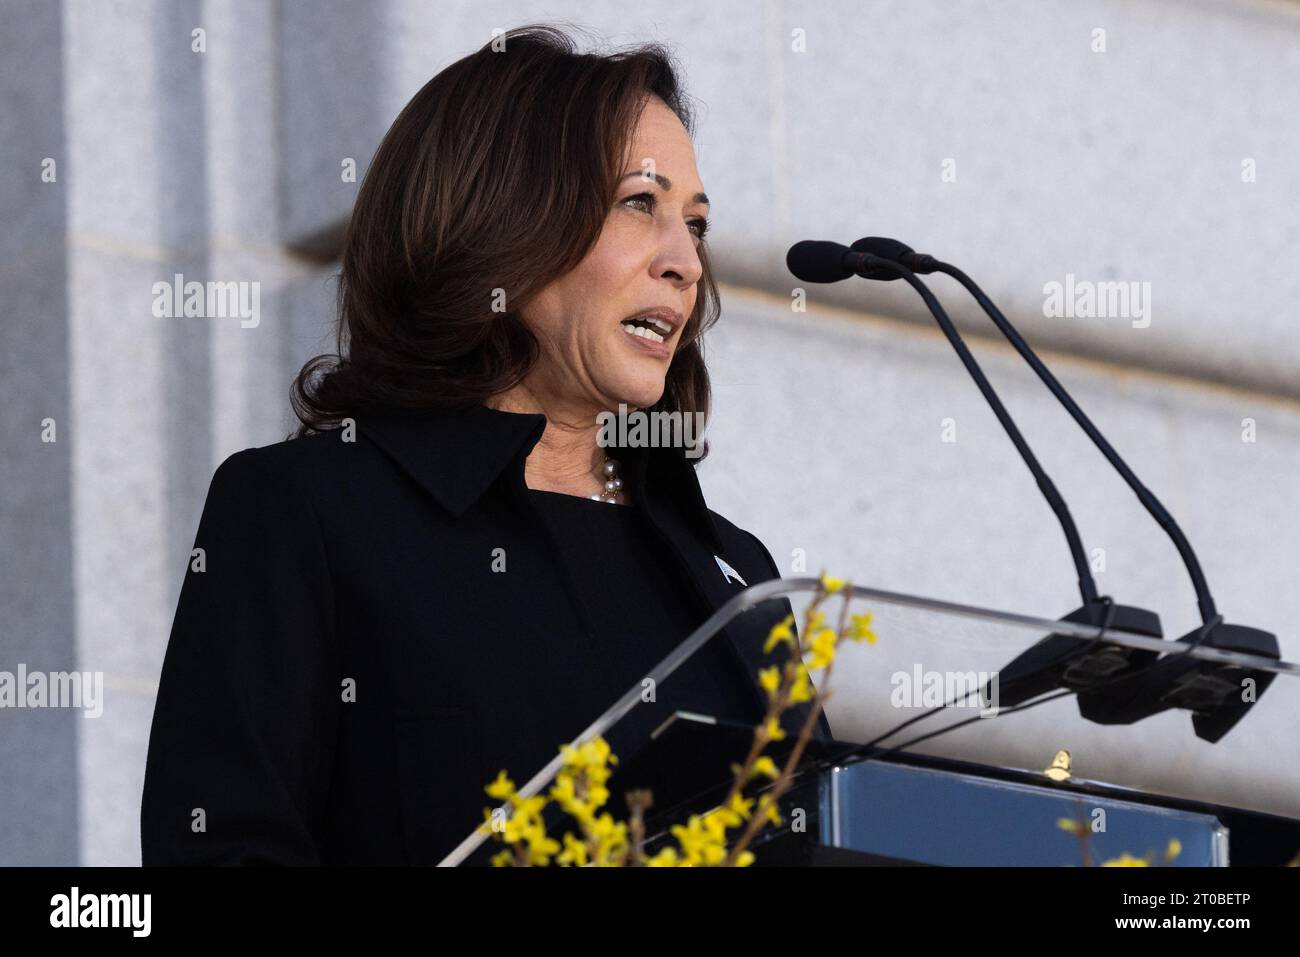 https://c8.alamy.com/comp/2T0BETP/san-francisco-united-states-05th-oct-2023-vice-president-kamala-harris-makes-remarks-at-the-memorial-service-for-senator-dianne-feinstein-at-city-hall-in-san-francisco-california-on-thursday-october-5-2023-feinstein-died-at-90-photo-by-benjamin-fanboypoolabacapresscom-credit-abaca-pressalamy-live-news-2T0BETP.jpg